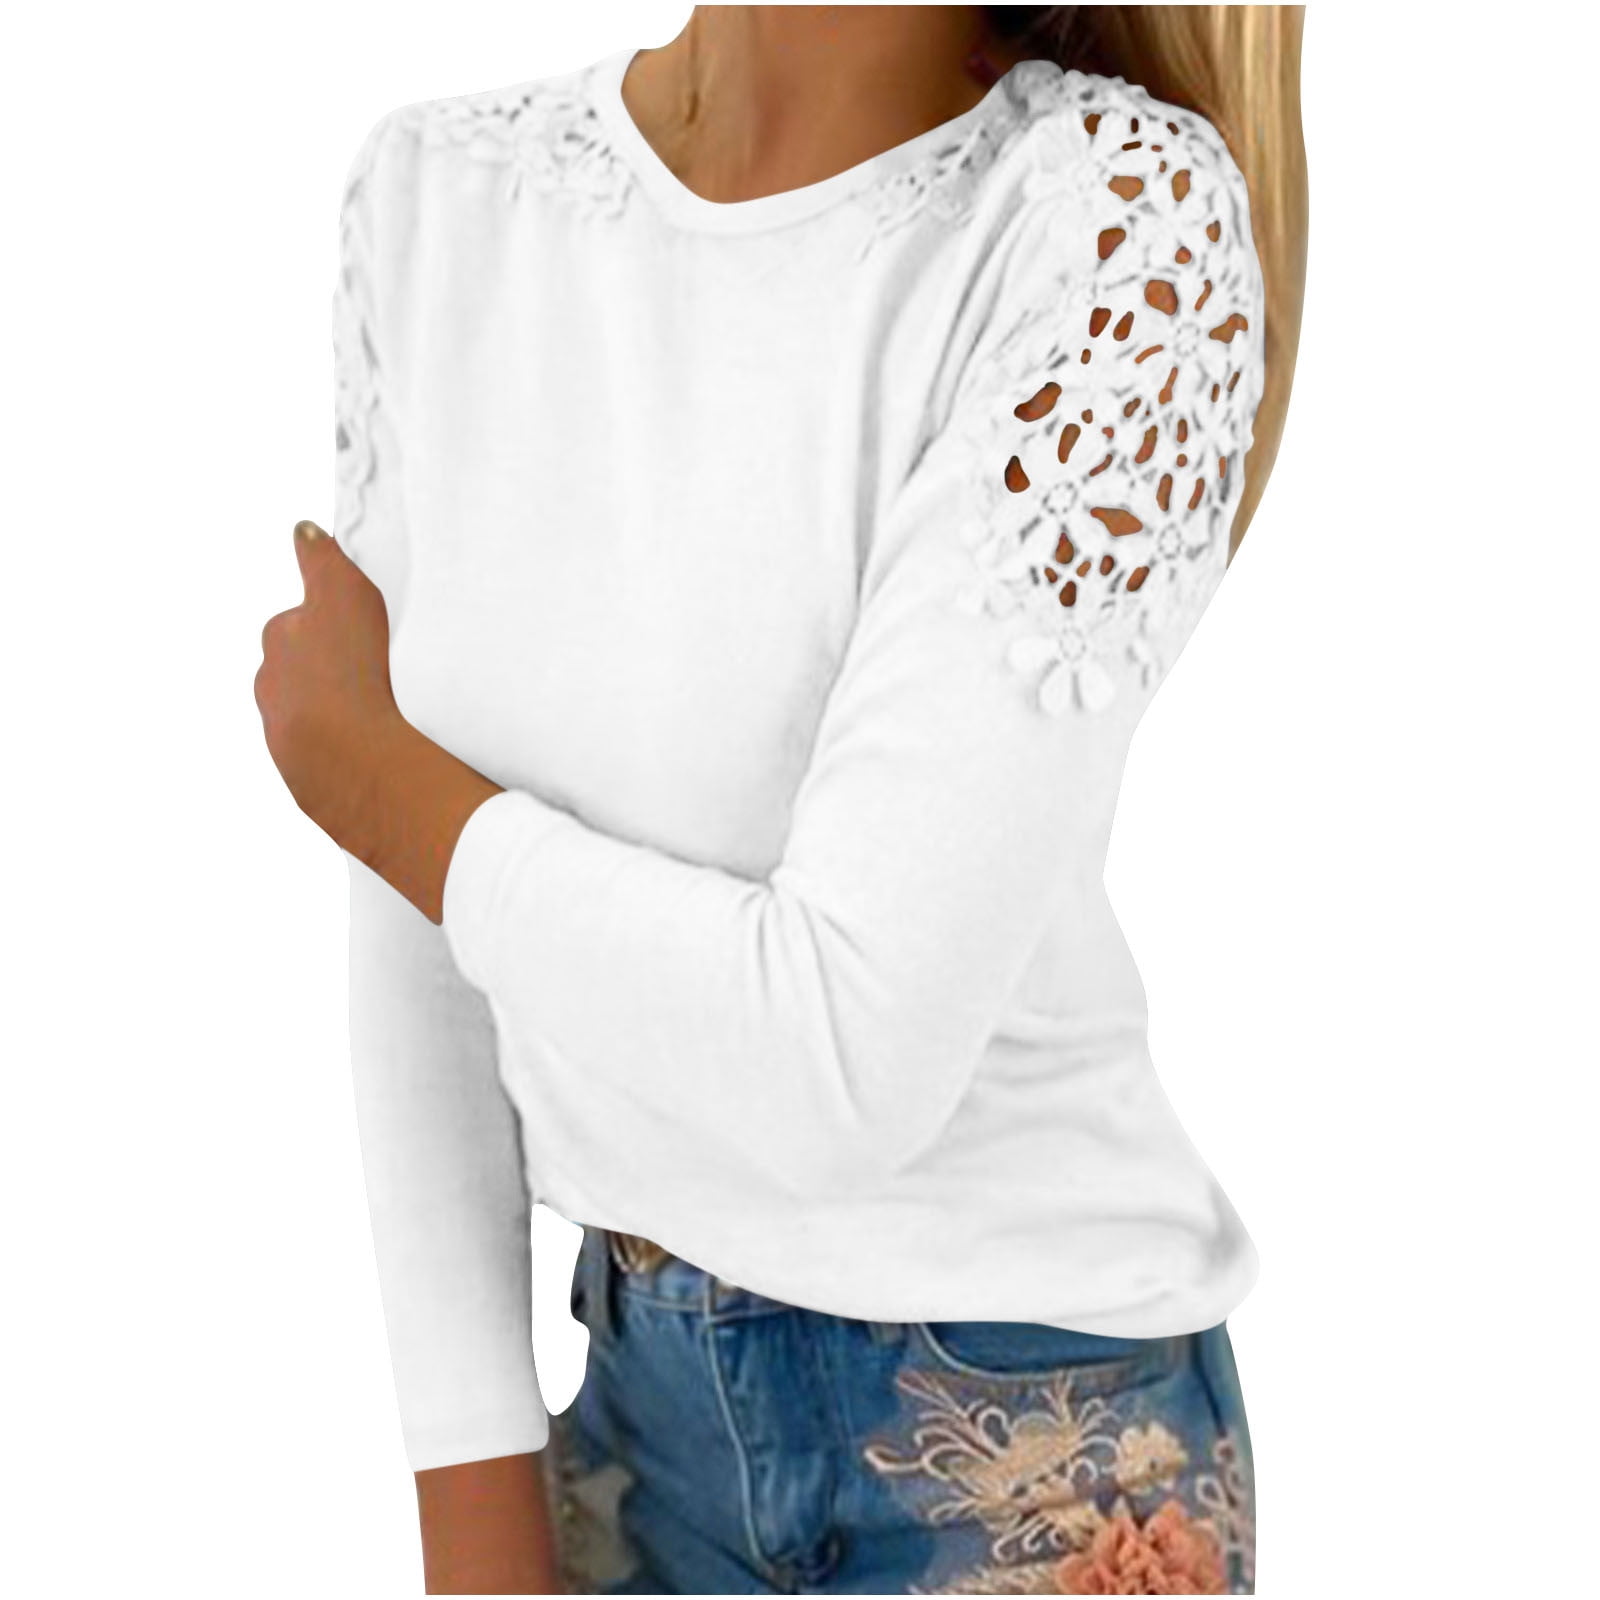 Women's Long Sleeve Tops Crewneck Lace Hollow out Trendy Blouse Solid ...